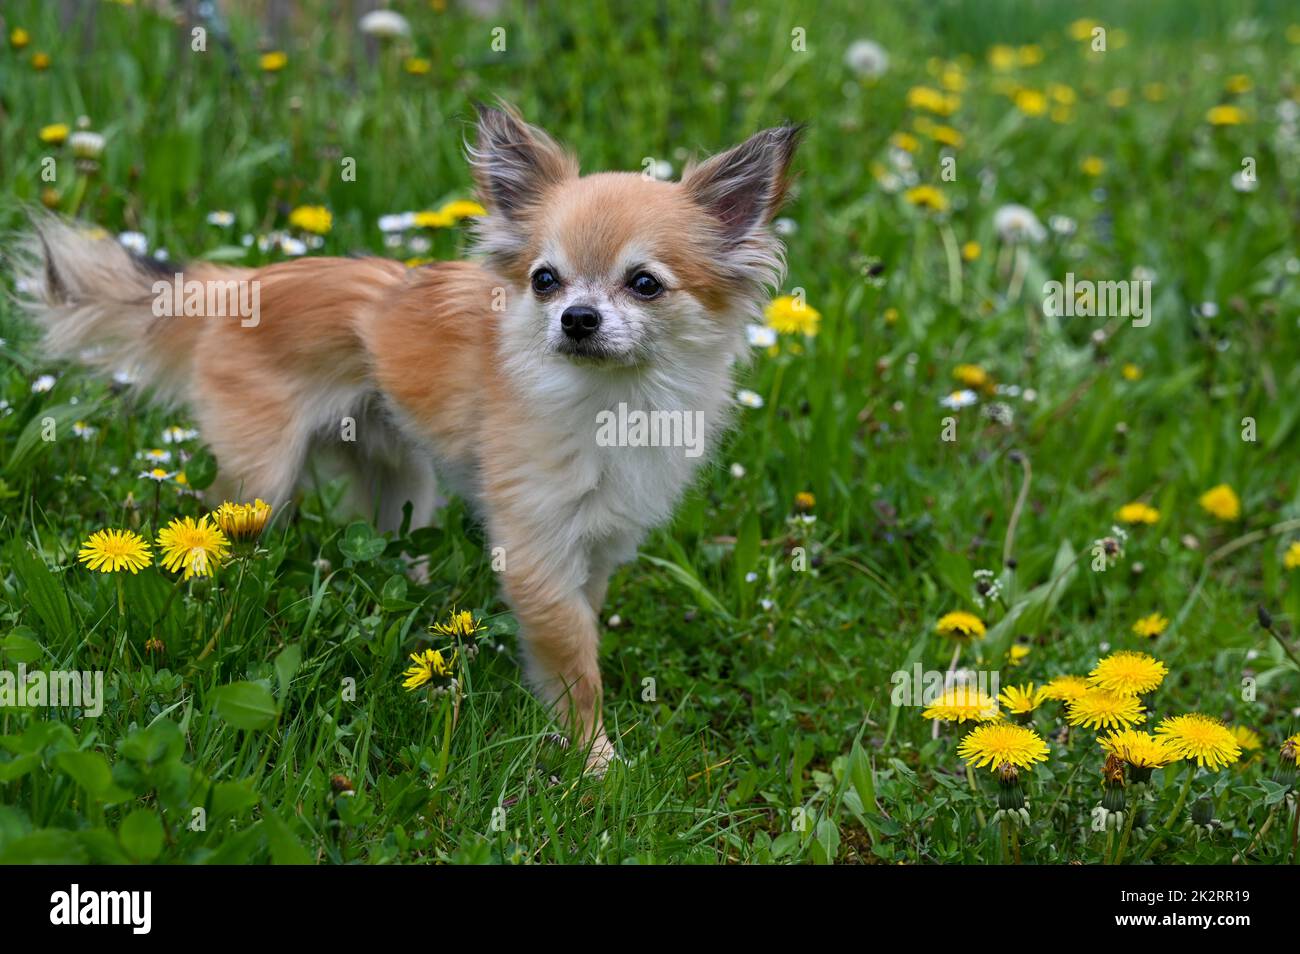 A chihuahua dog in a green meadow with dandelion flowers Stock Photo